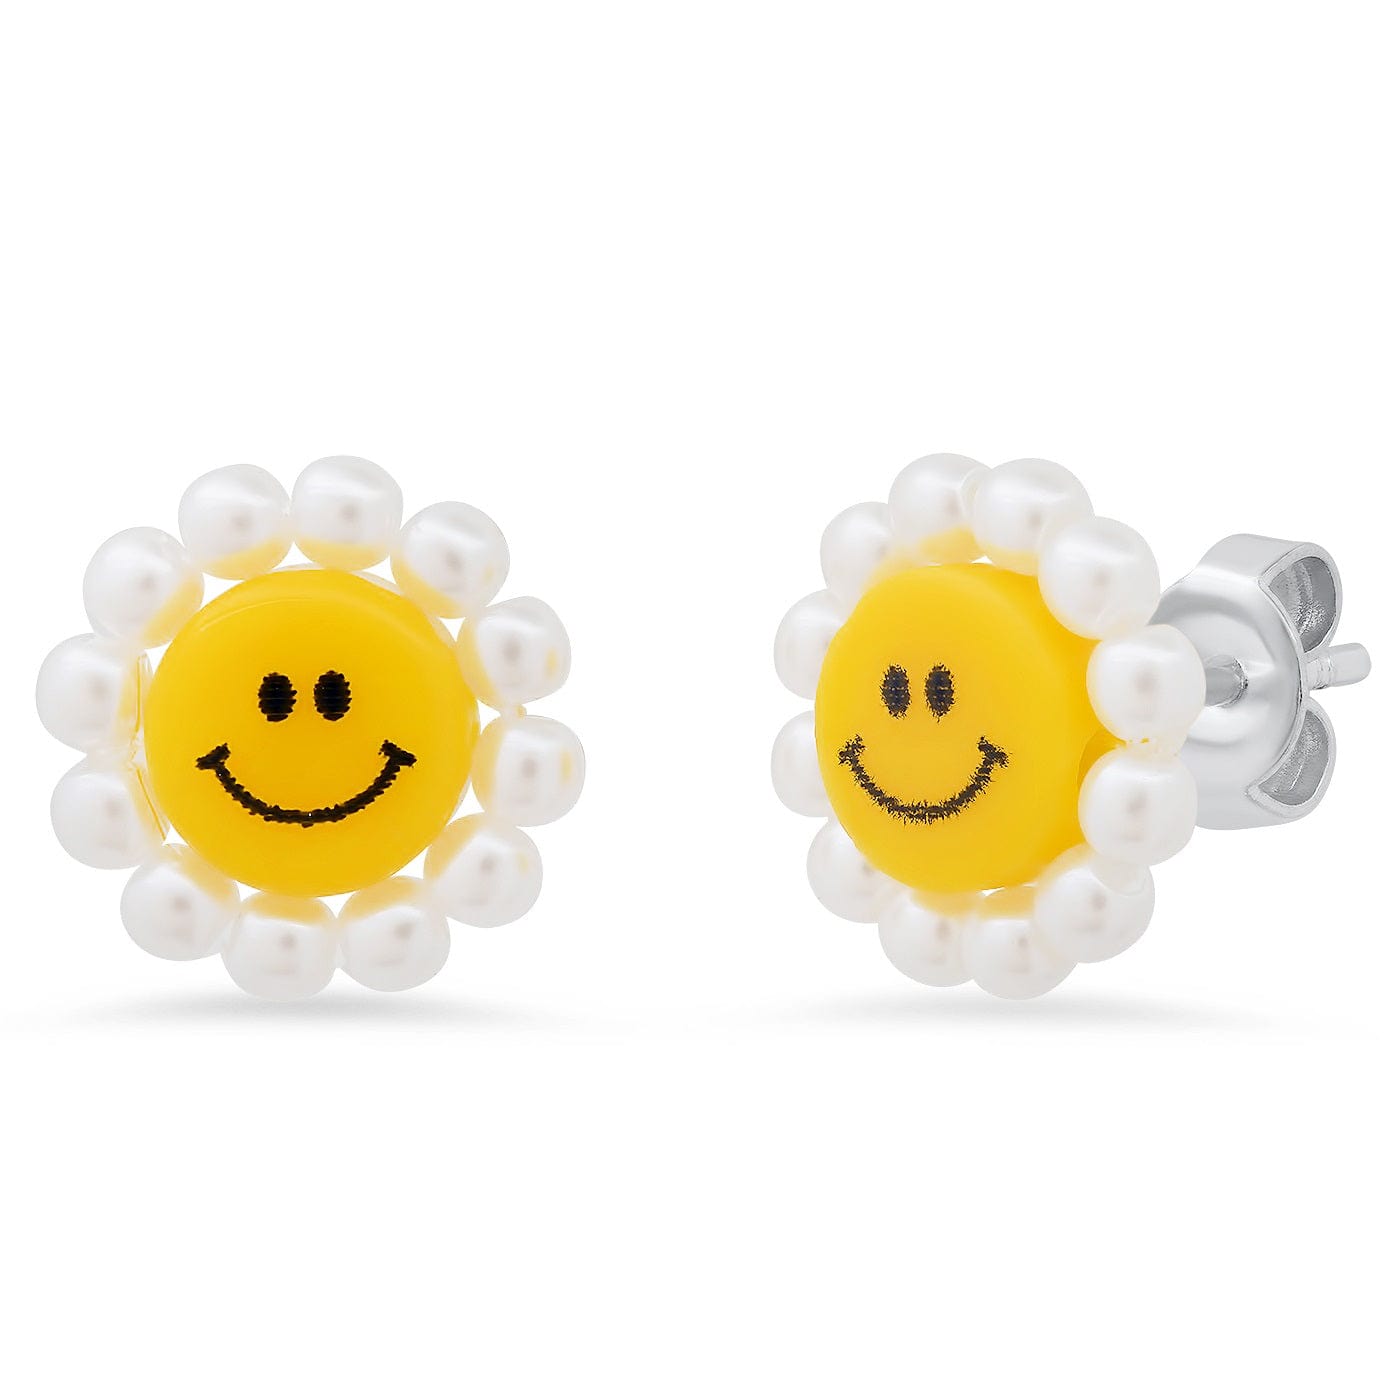 TAI JEWELRY Earrings S/PRL Smiley Face Studs with Bead Accents